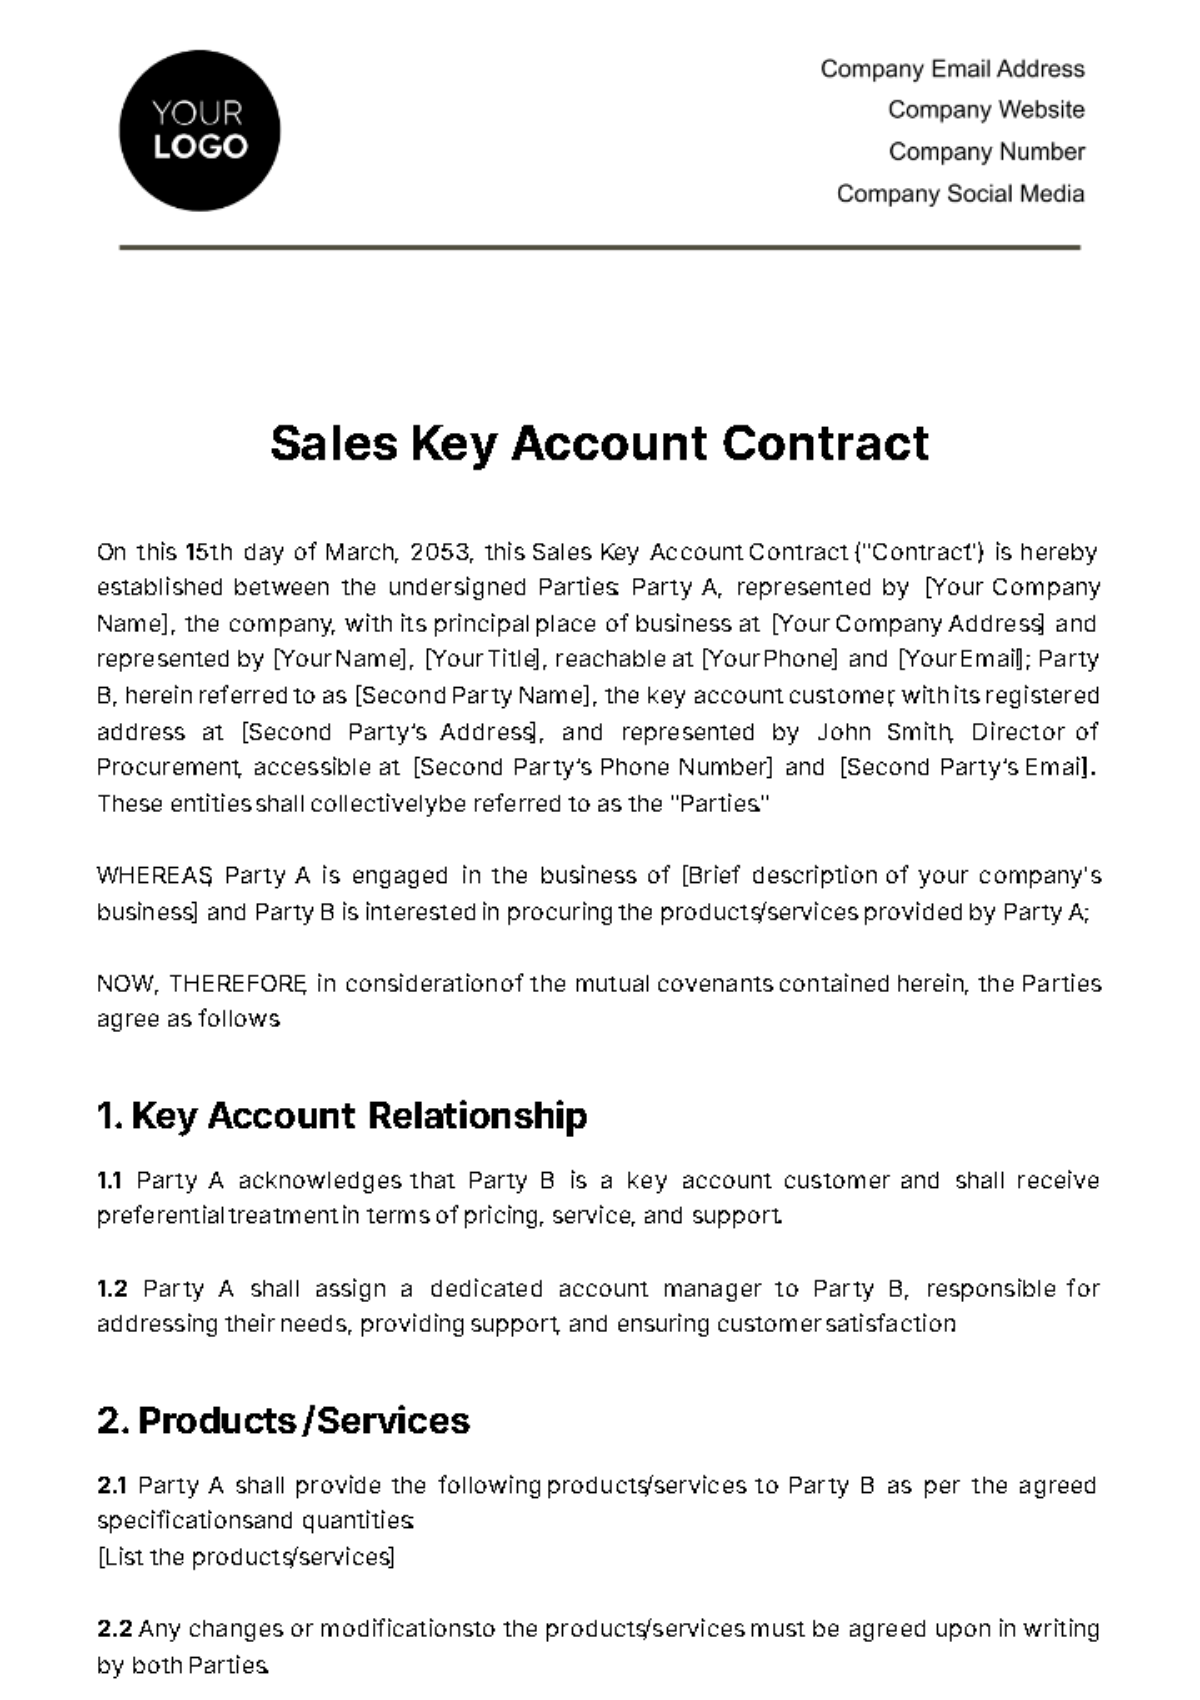 Sales Key Account Contract Template